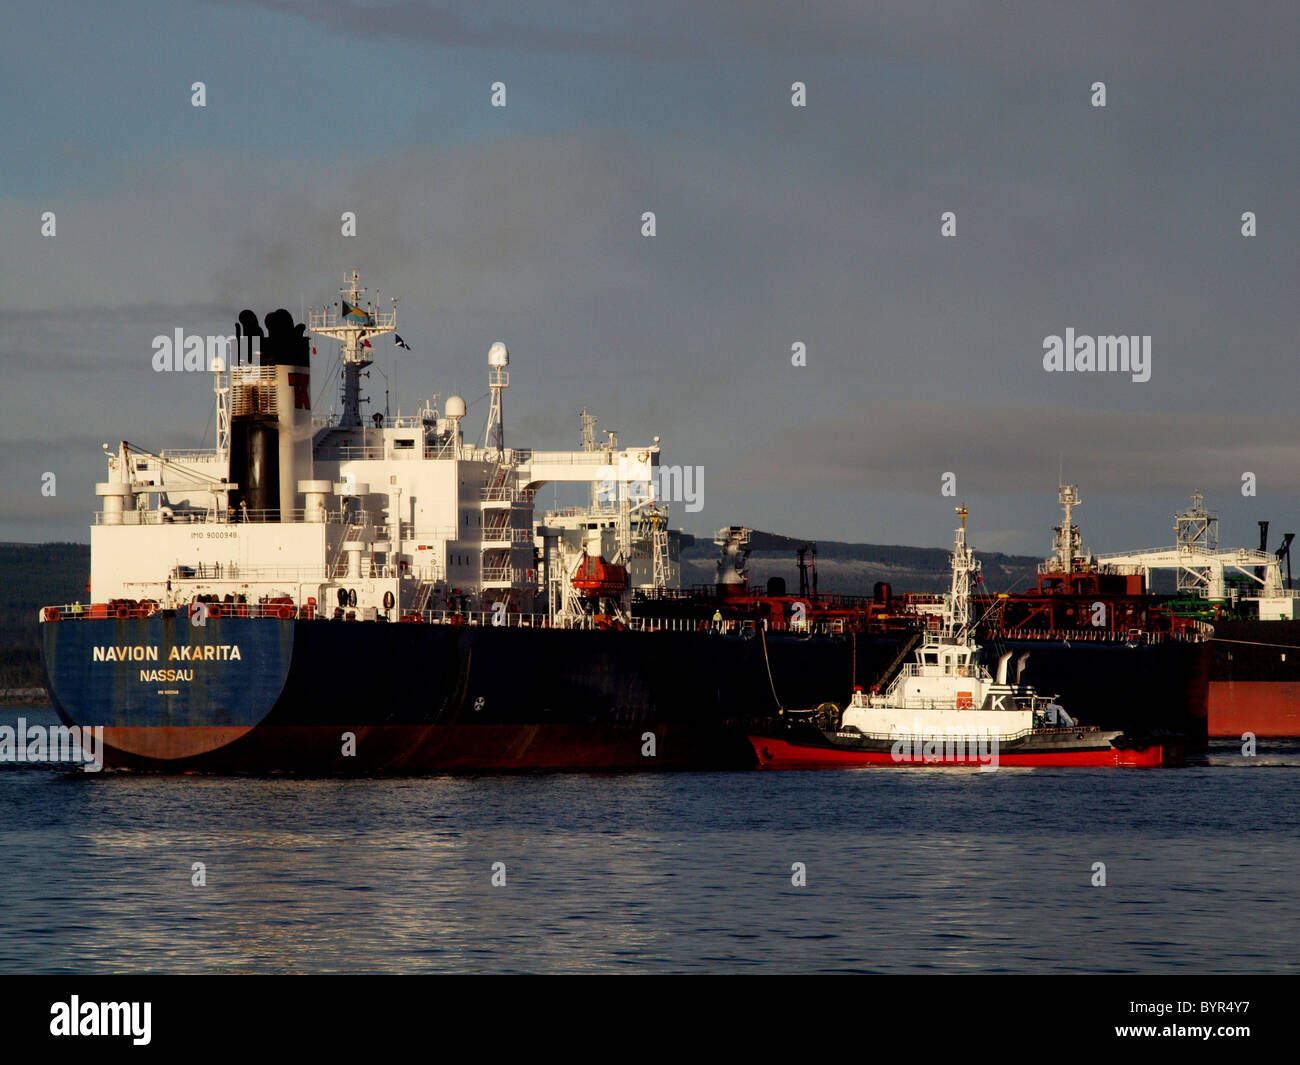 A tug maneuvers a Tanker at the Nigg Oil Terminal, Cromarty Firth, Scotland Stock Photo